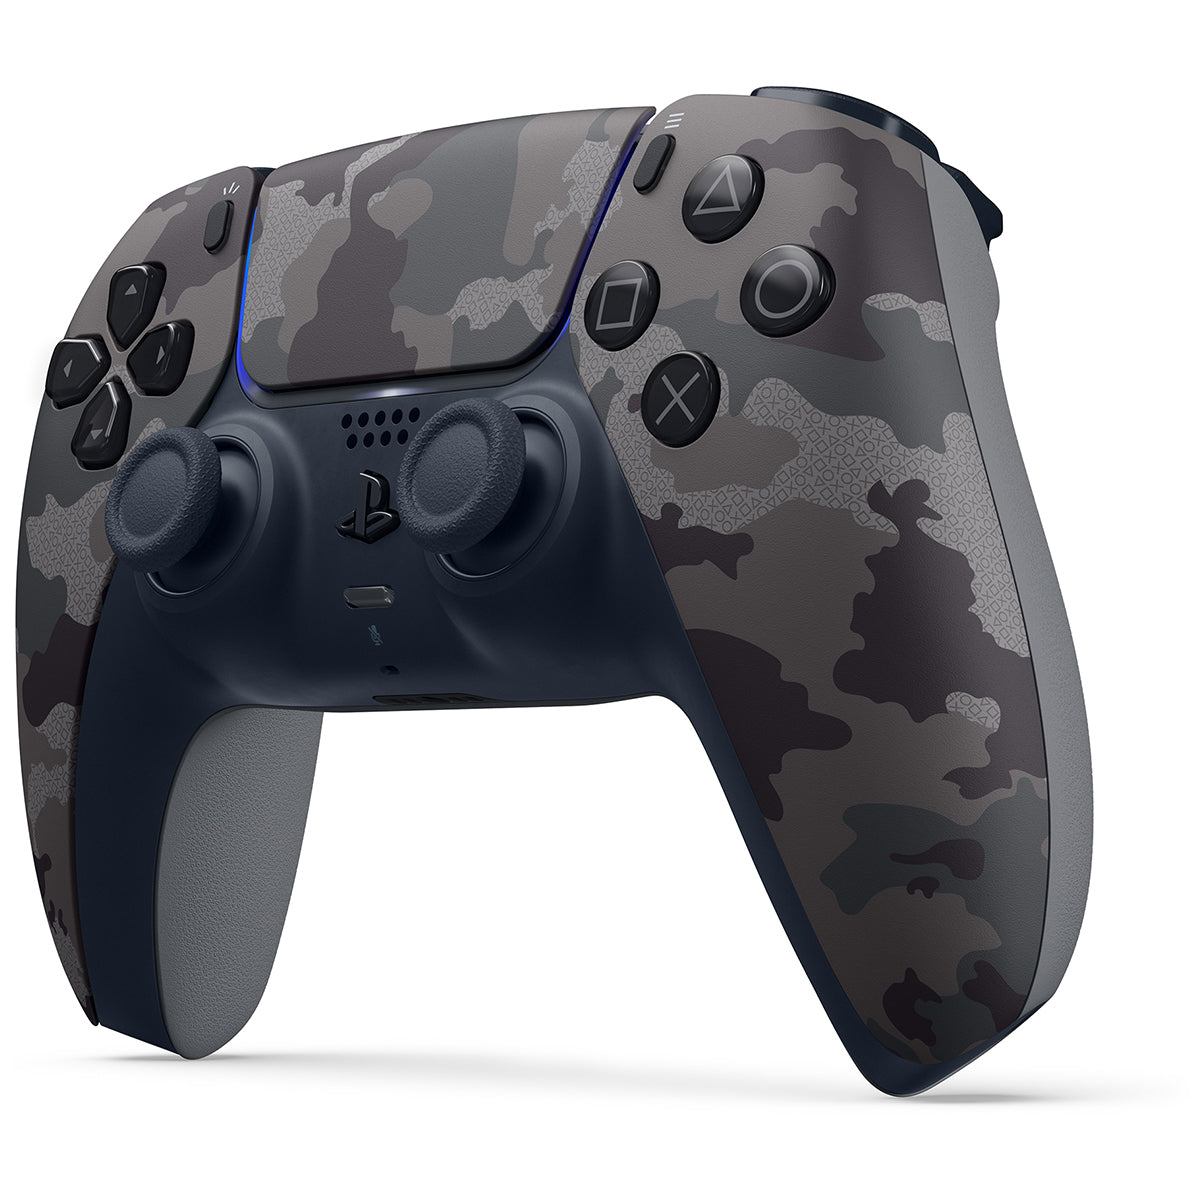 Sony Playstation 5 Disc Edition with Extra Gray Camo Controller and Trigger Kit Bundle - Pro-Distributing